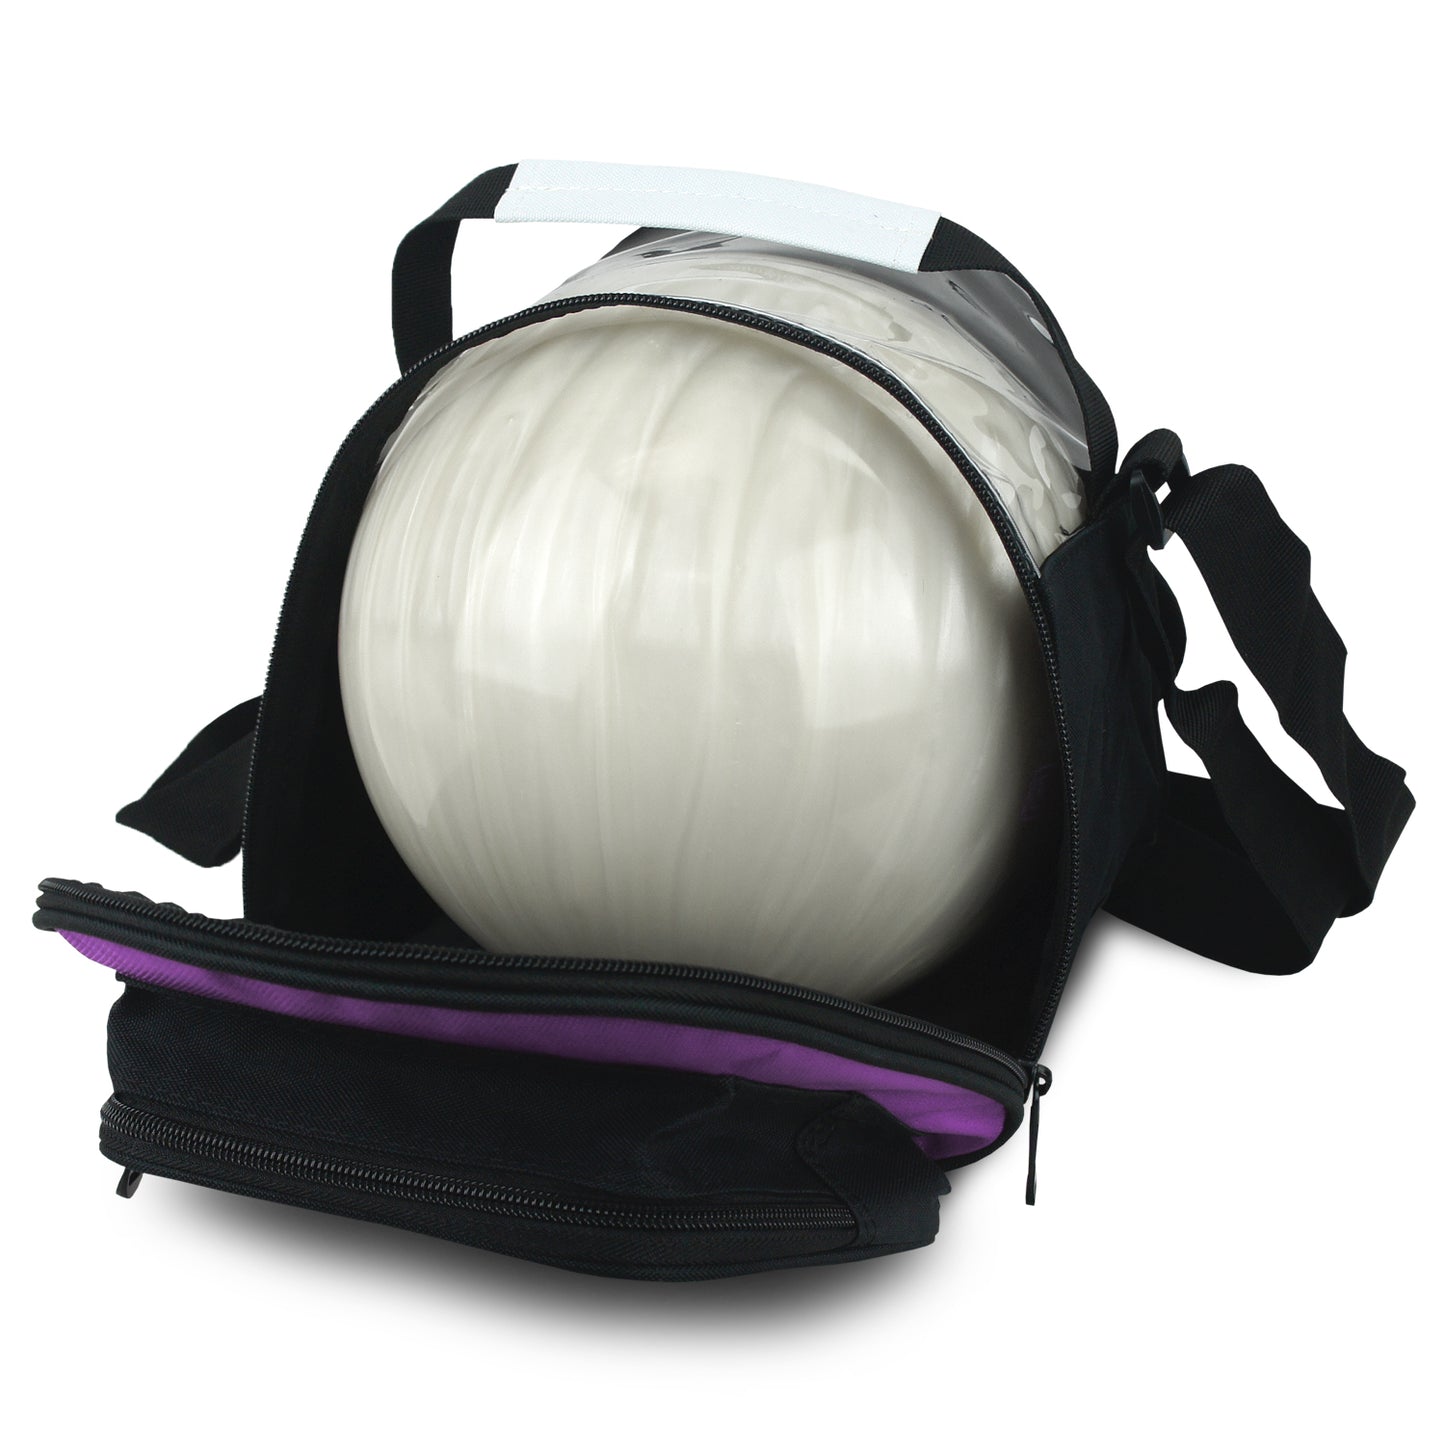 Tenth Frame Deluxe Add-On - 1 Ball Add-On Bowling Bag (Purple - Front Loading)